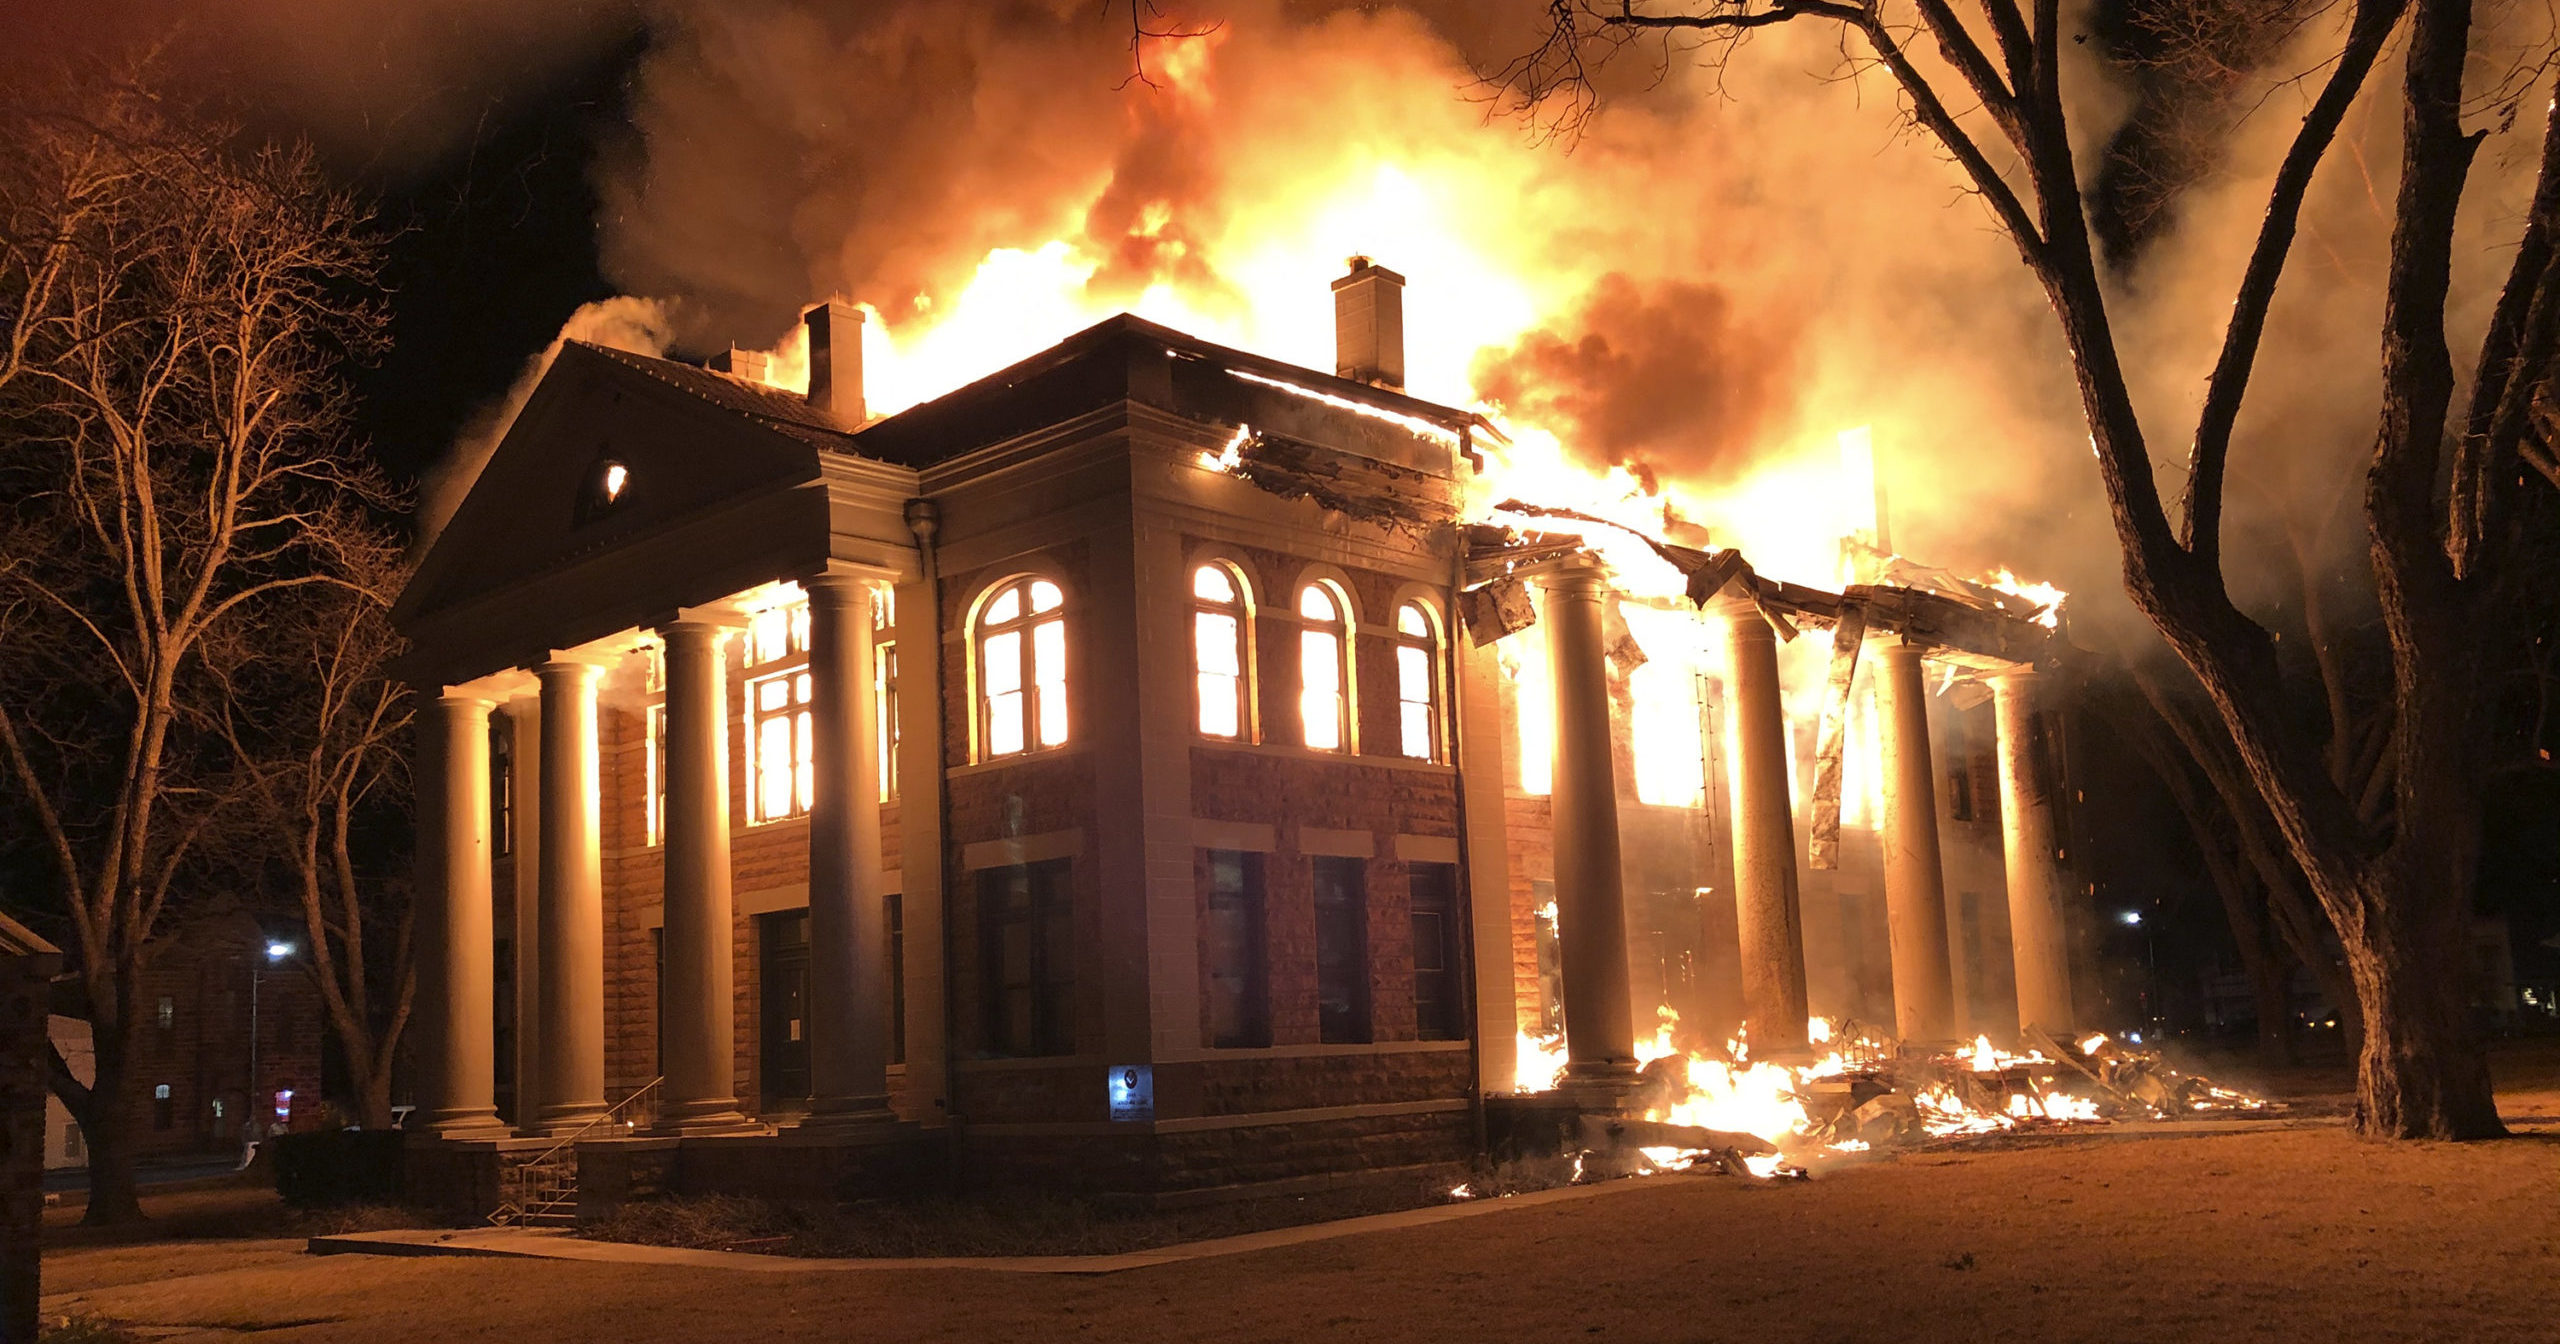 This photo shows a fire at the Mason County Courthouse on Feb. 4, 2021, in Mason, Texas.